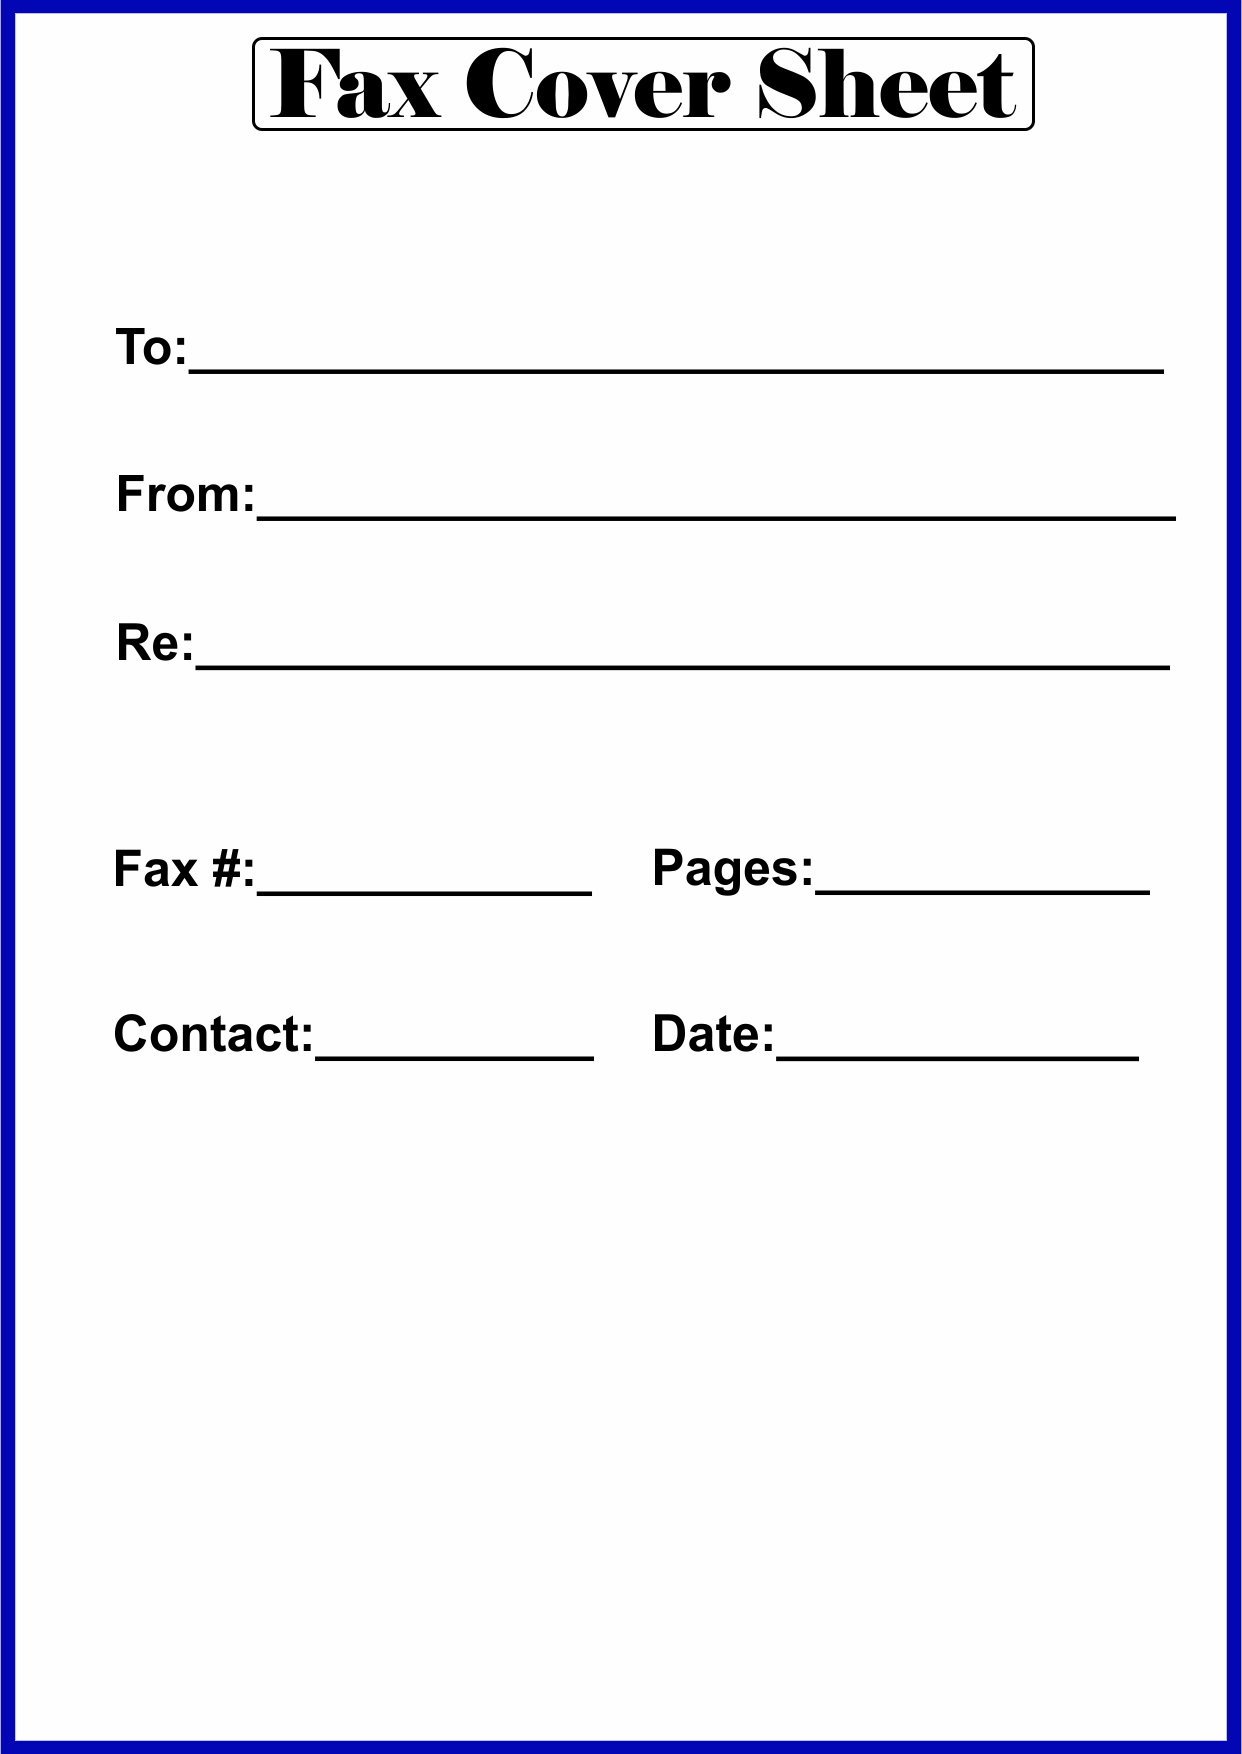 Fax Cover Template Printable from faxcoversheethub.com